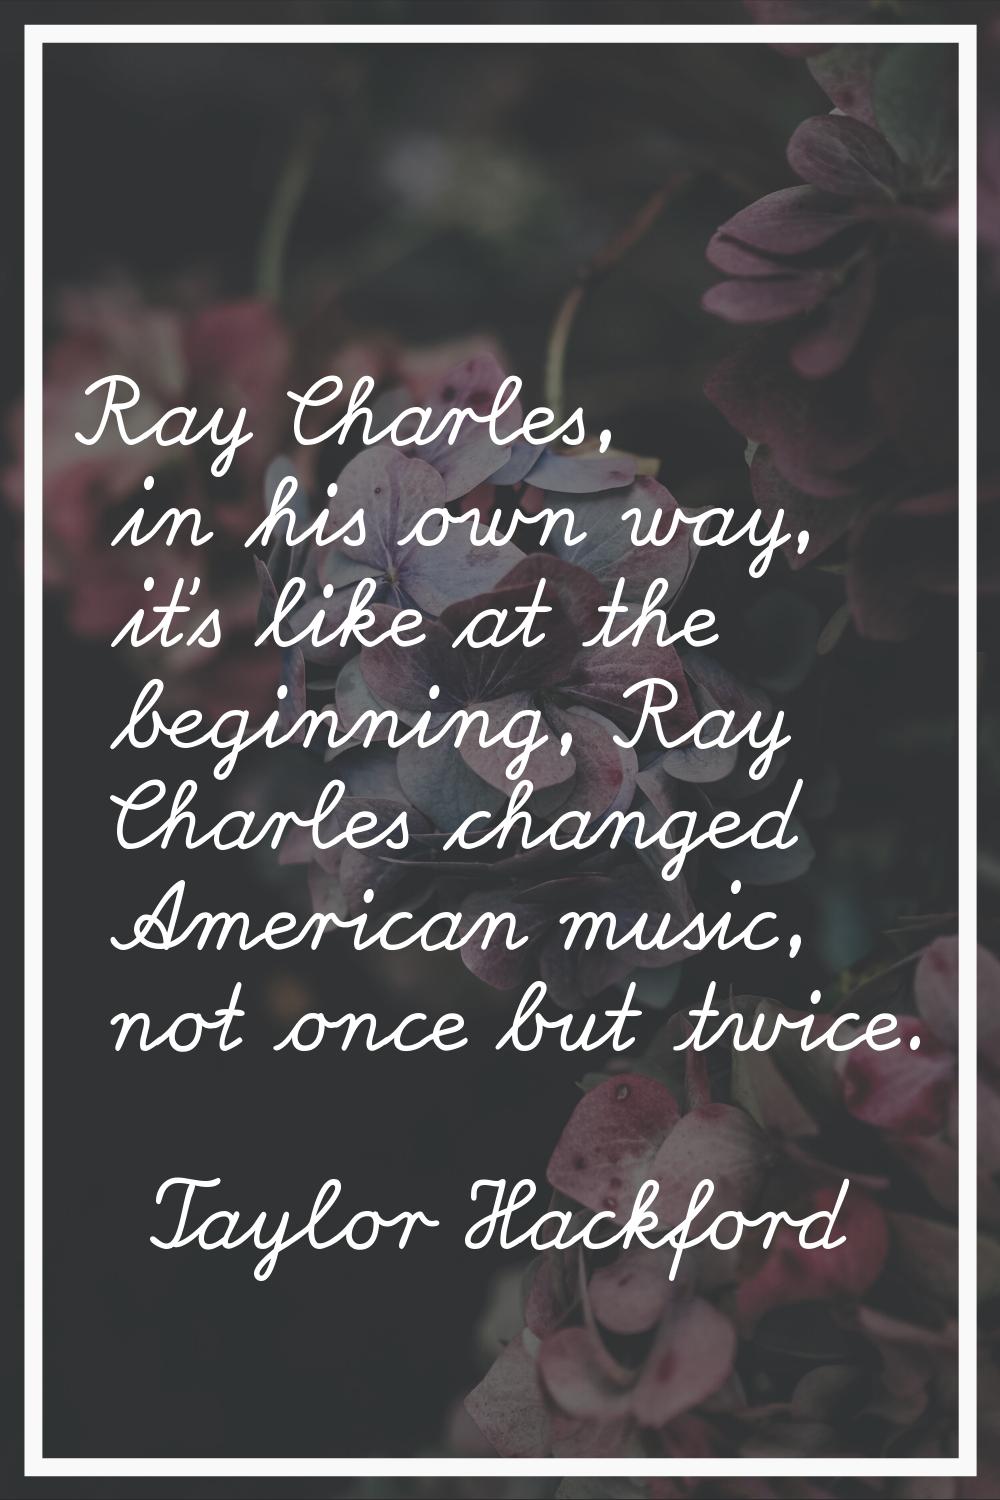 Ray Charles, in his own way, it's like at the beginning, Ray Charles changed American music, not on